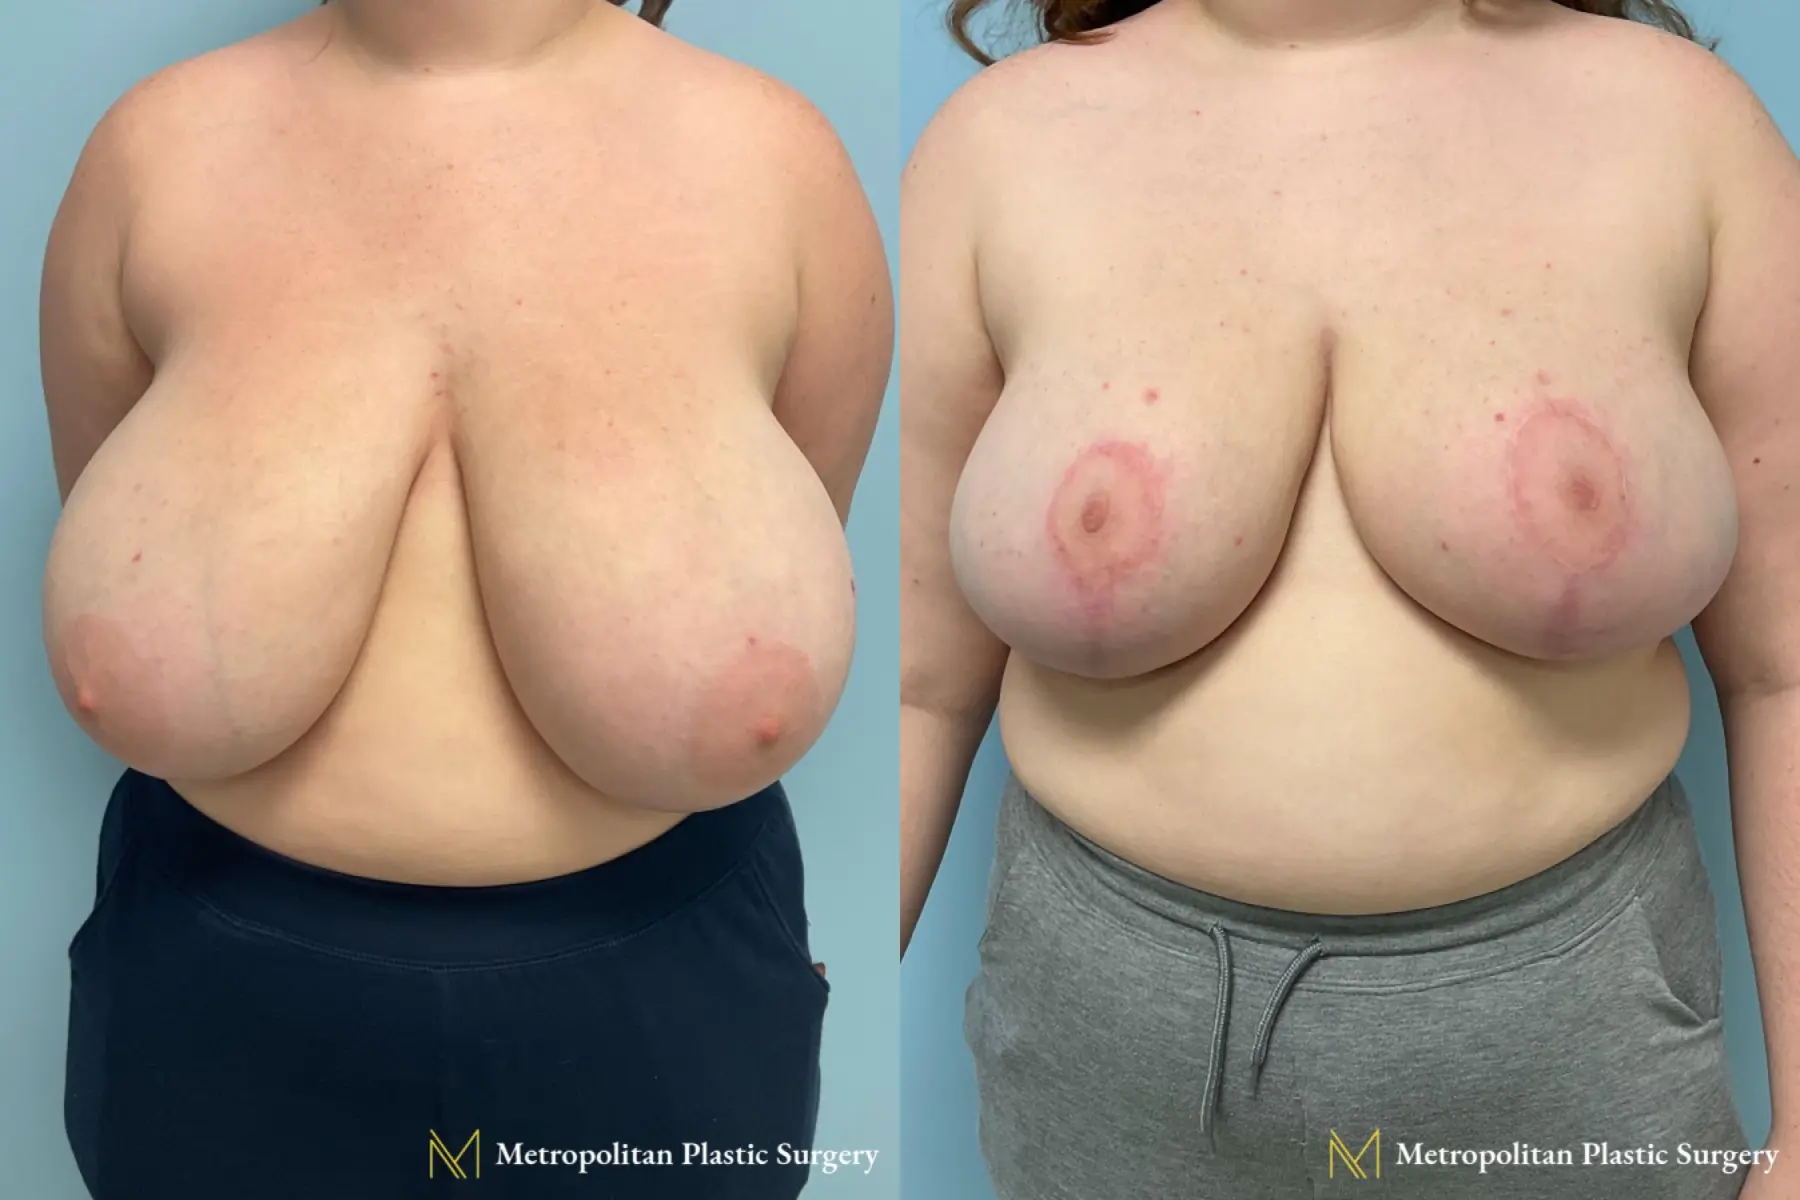 Before and after breast reduction surgery by Julia Spears MD - Before and After